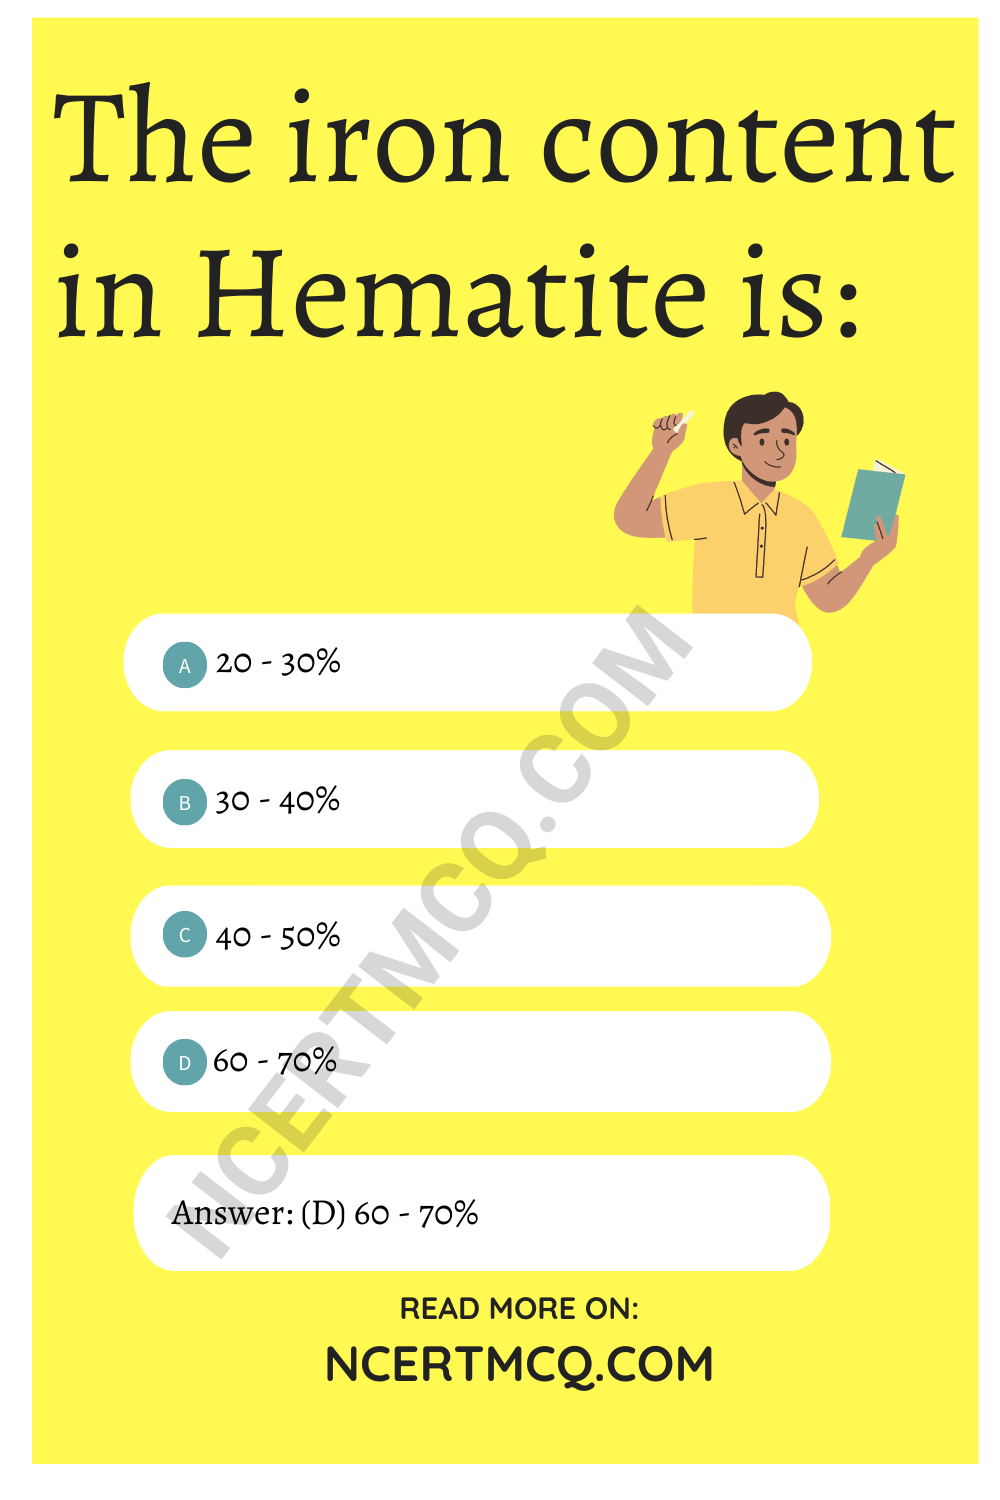 The iron content in Hematite is: